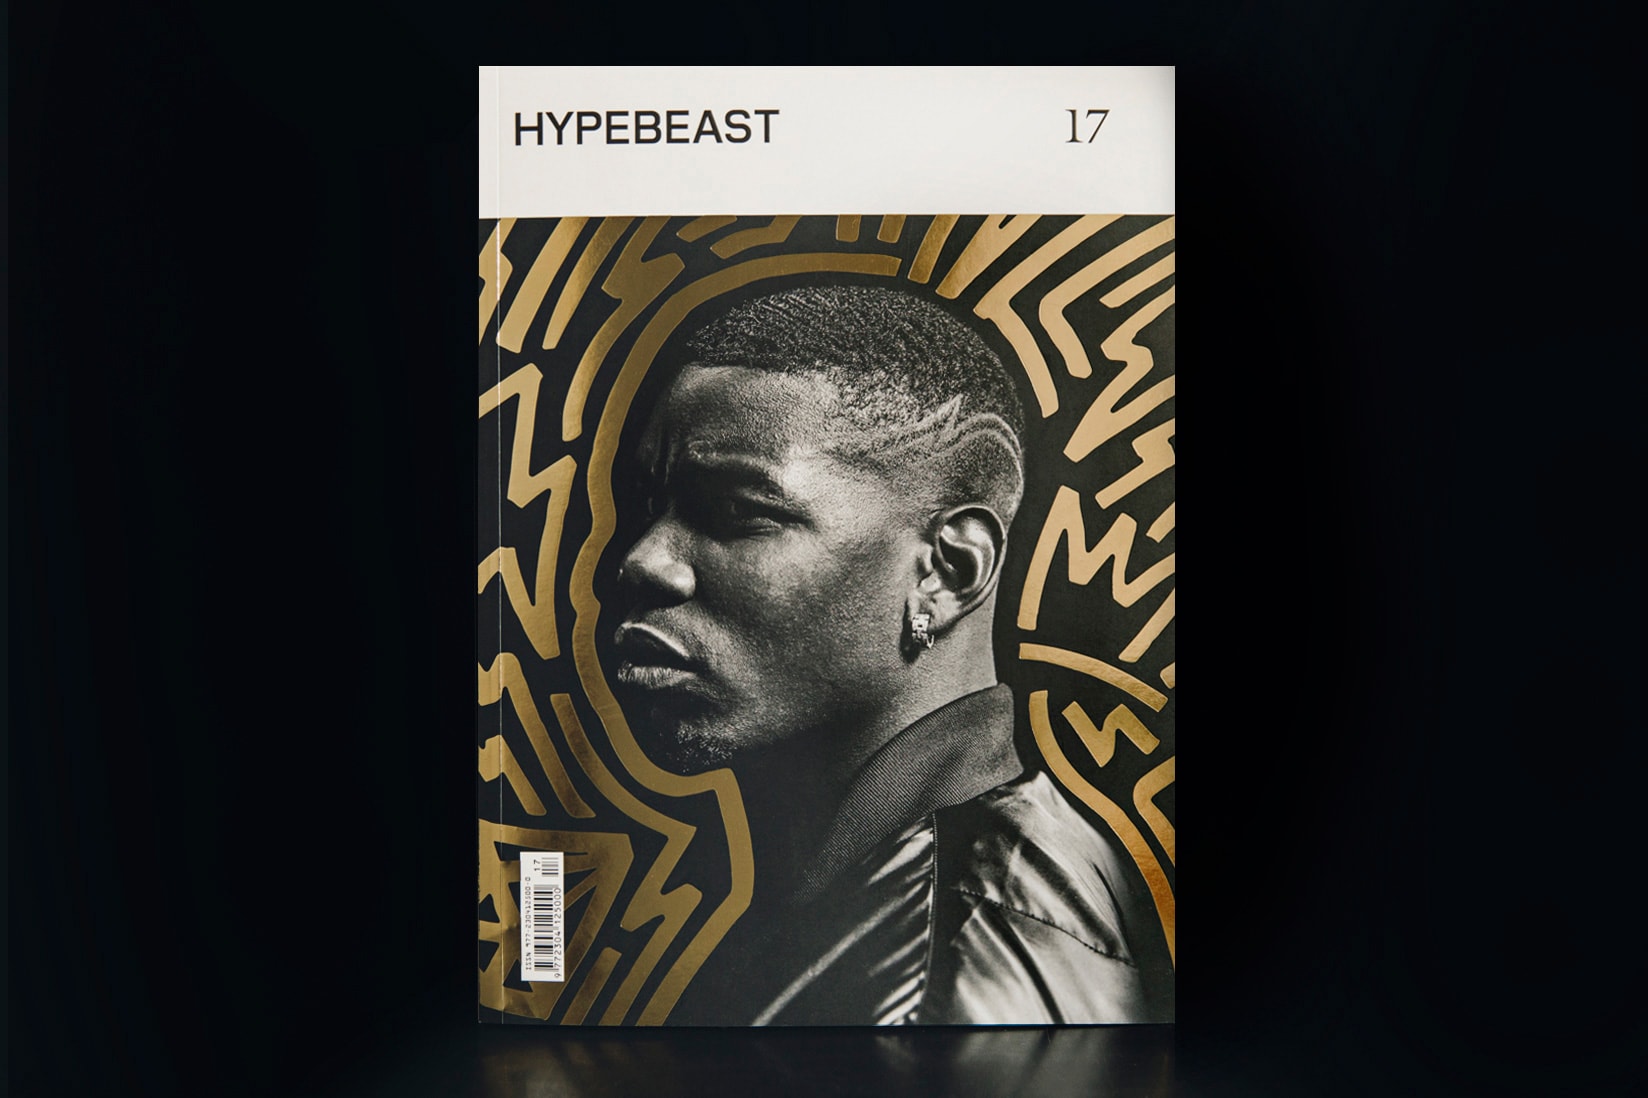 HYPEBEAST Magazine Issue 17: The Connection Issue pogba magazine